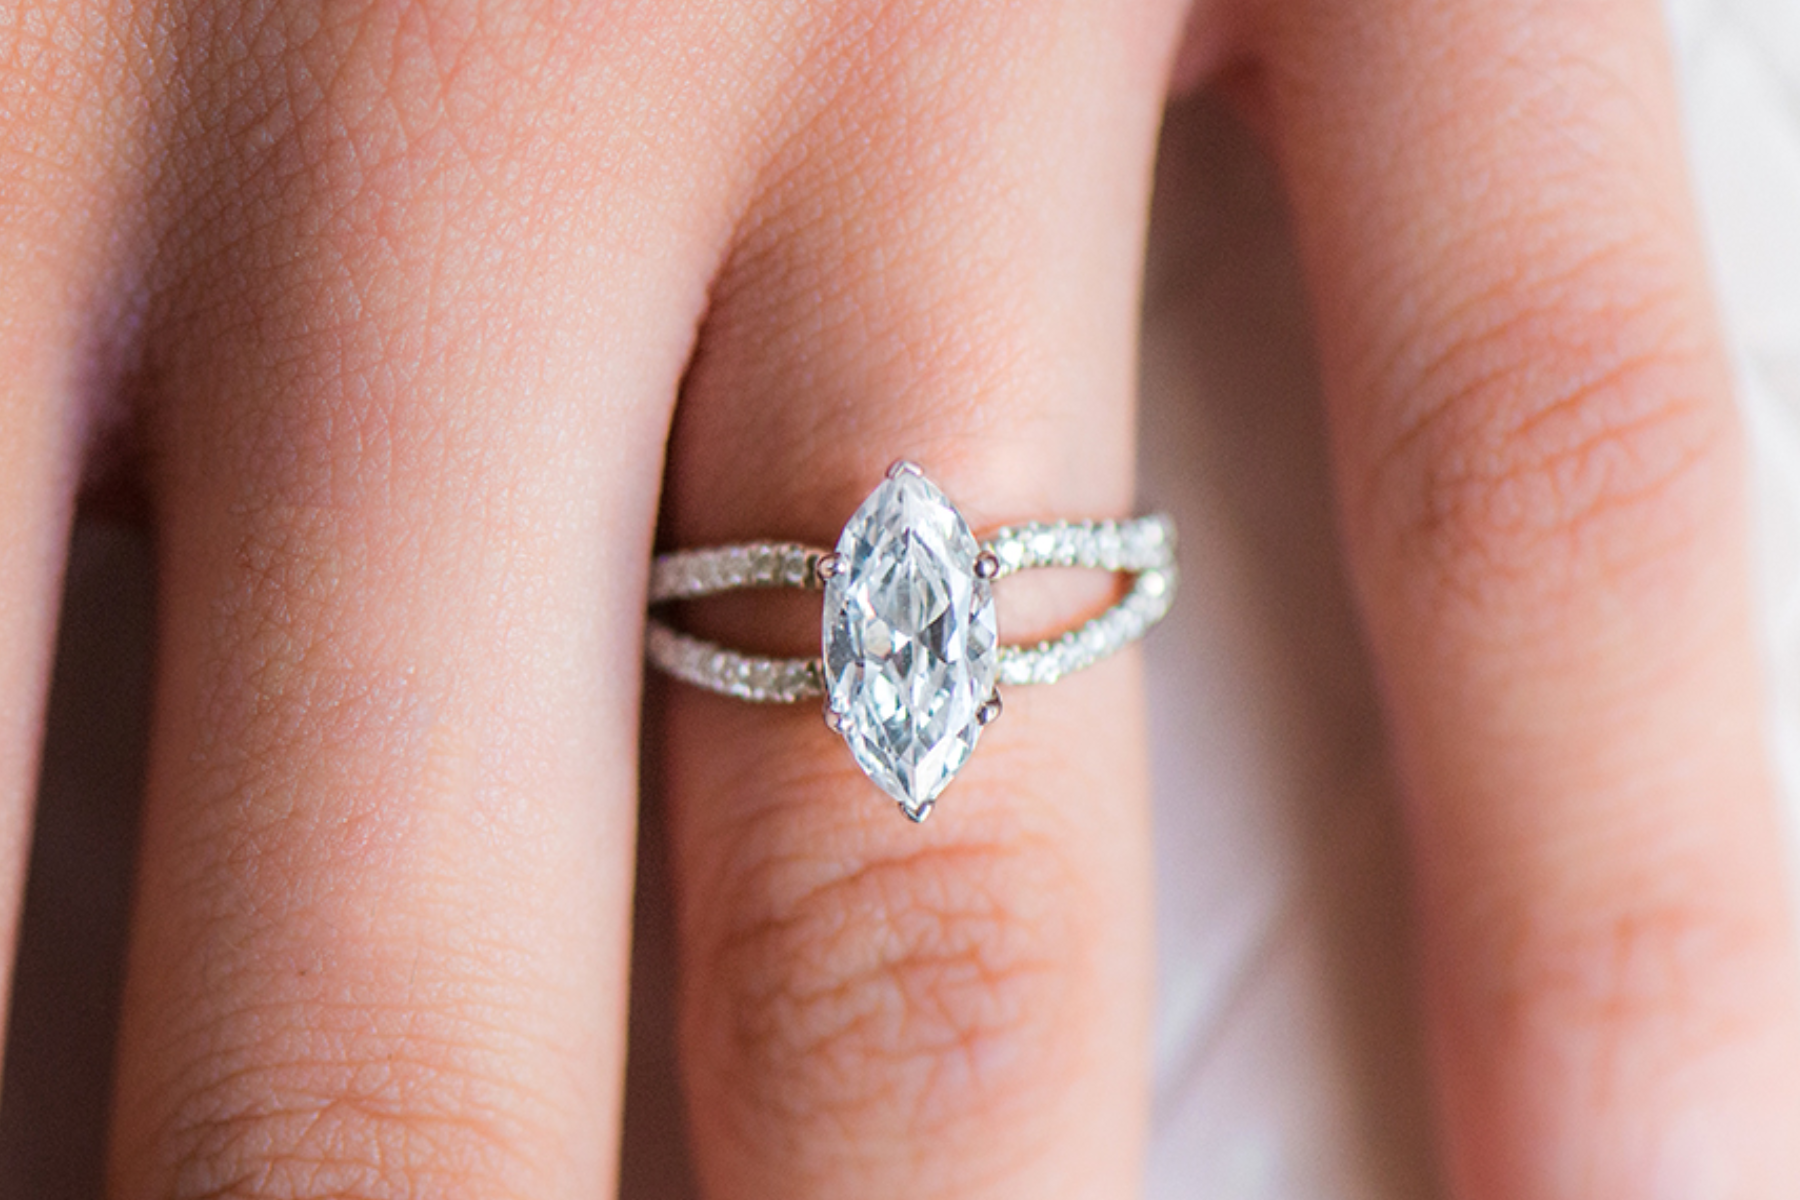 A close-up photograph of a woman's hand with a marquise-cut diamond engagement ring on her ring finger